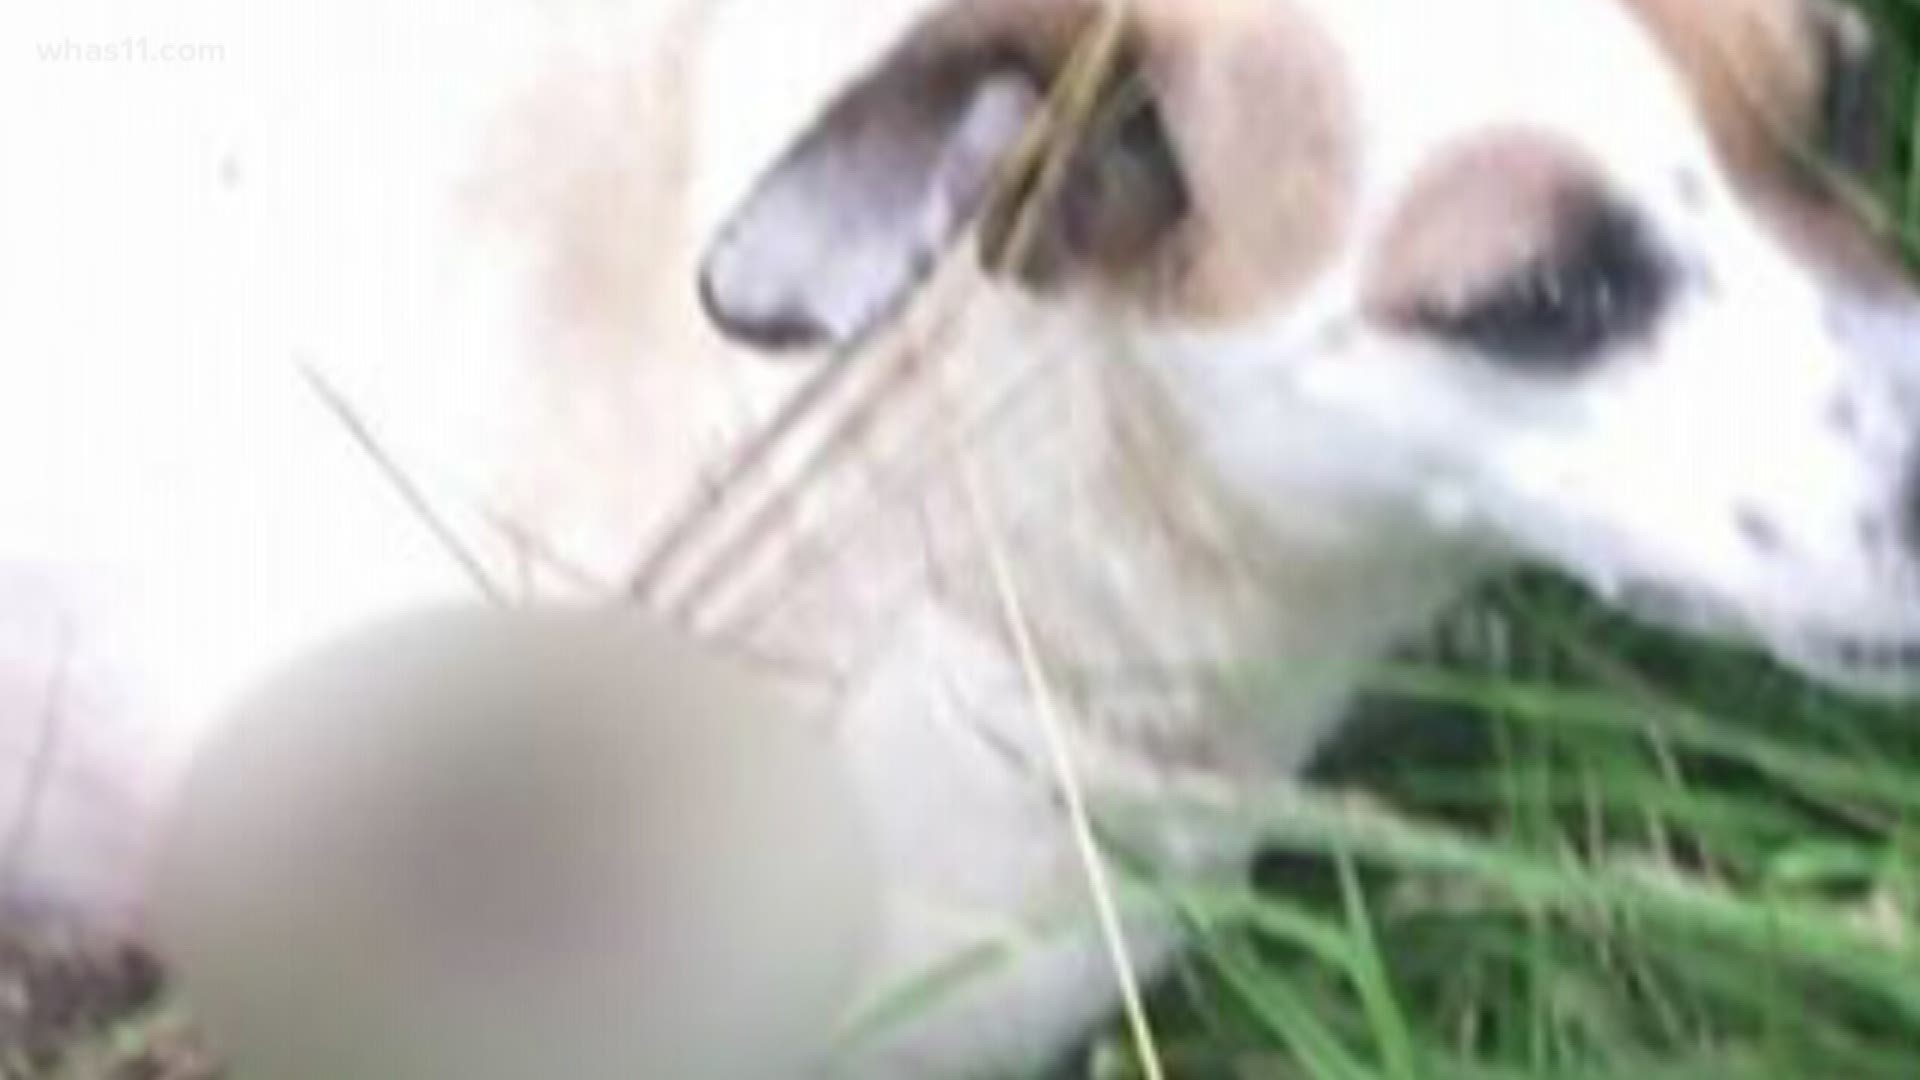 The reward is growing and attention increasing in the case of a Jack Russell terrier who was shot and killed by a bow and arrow in the Fairdale area.